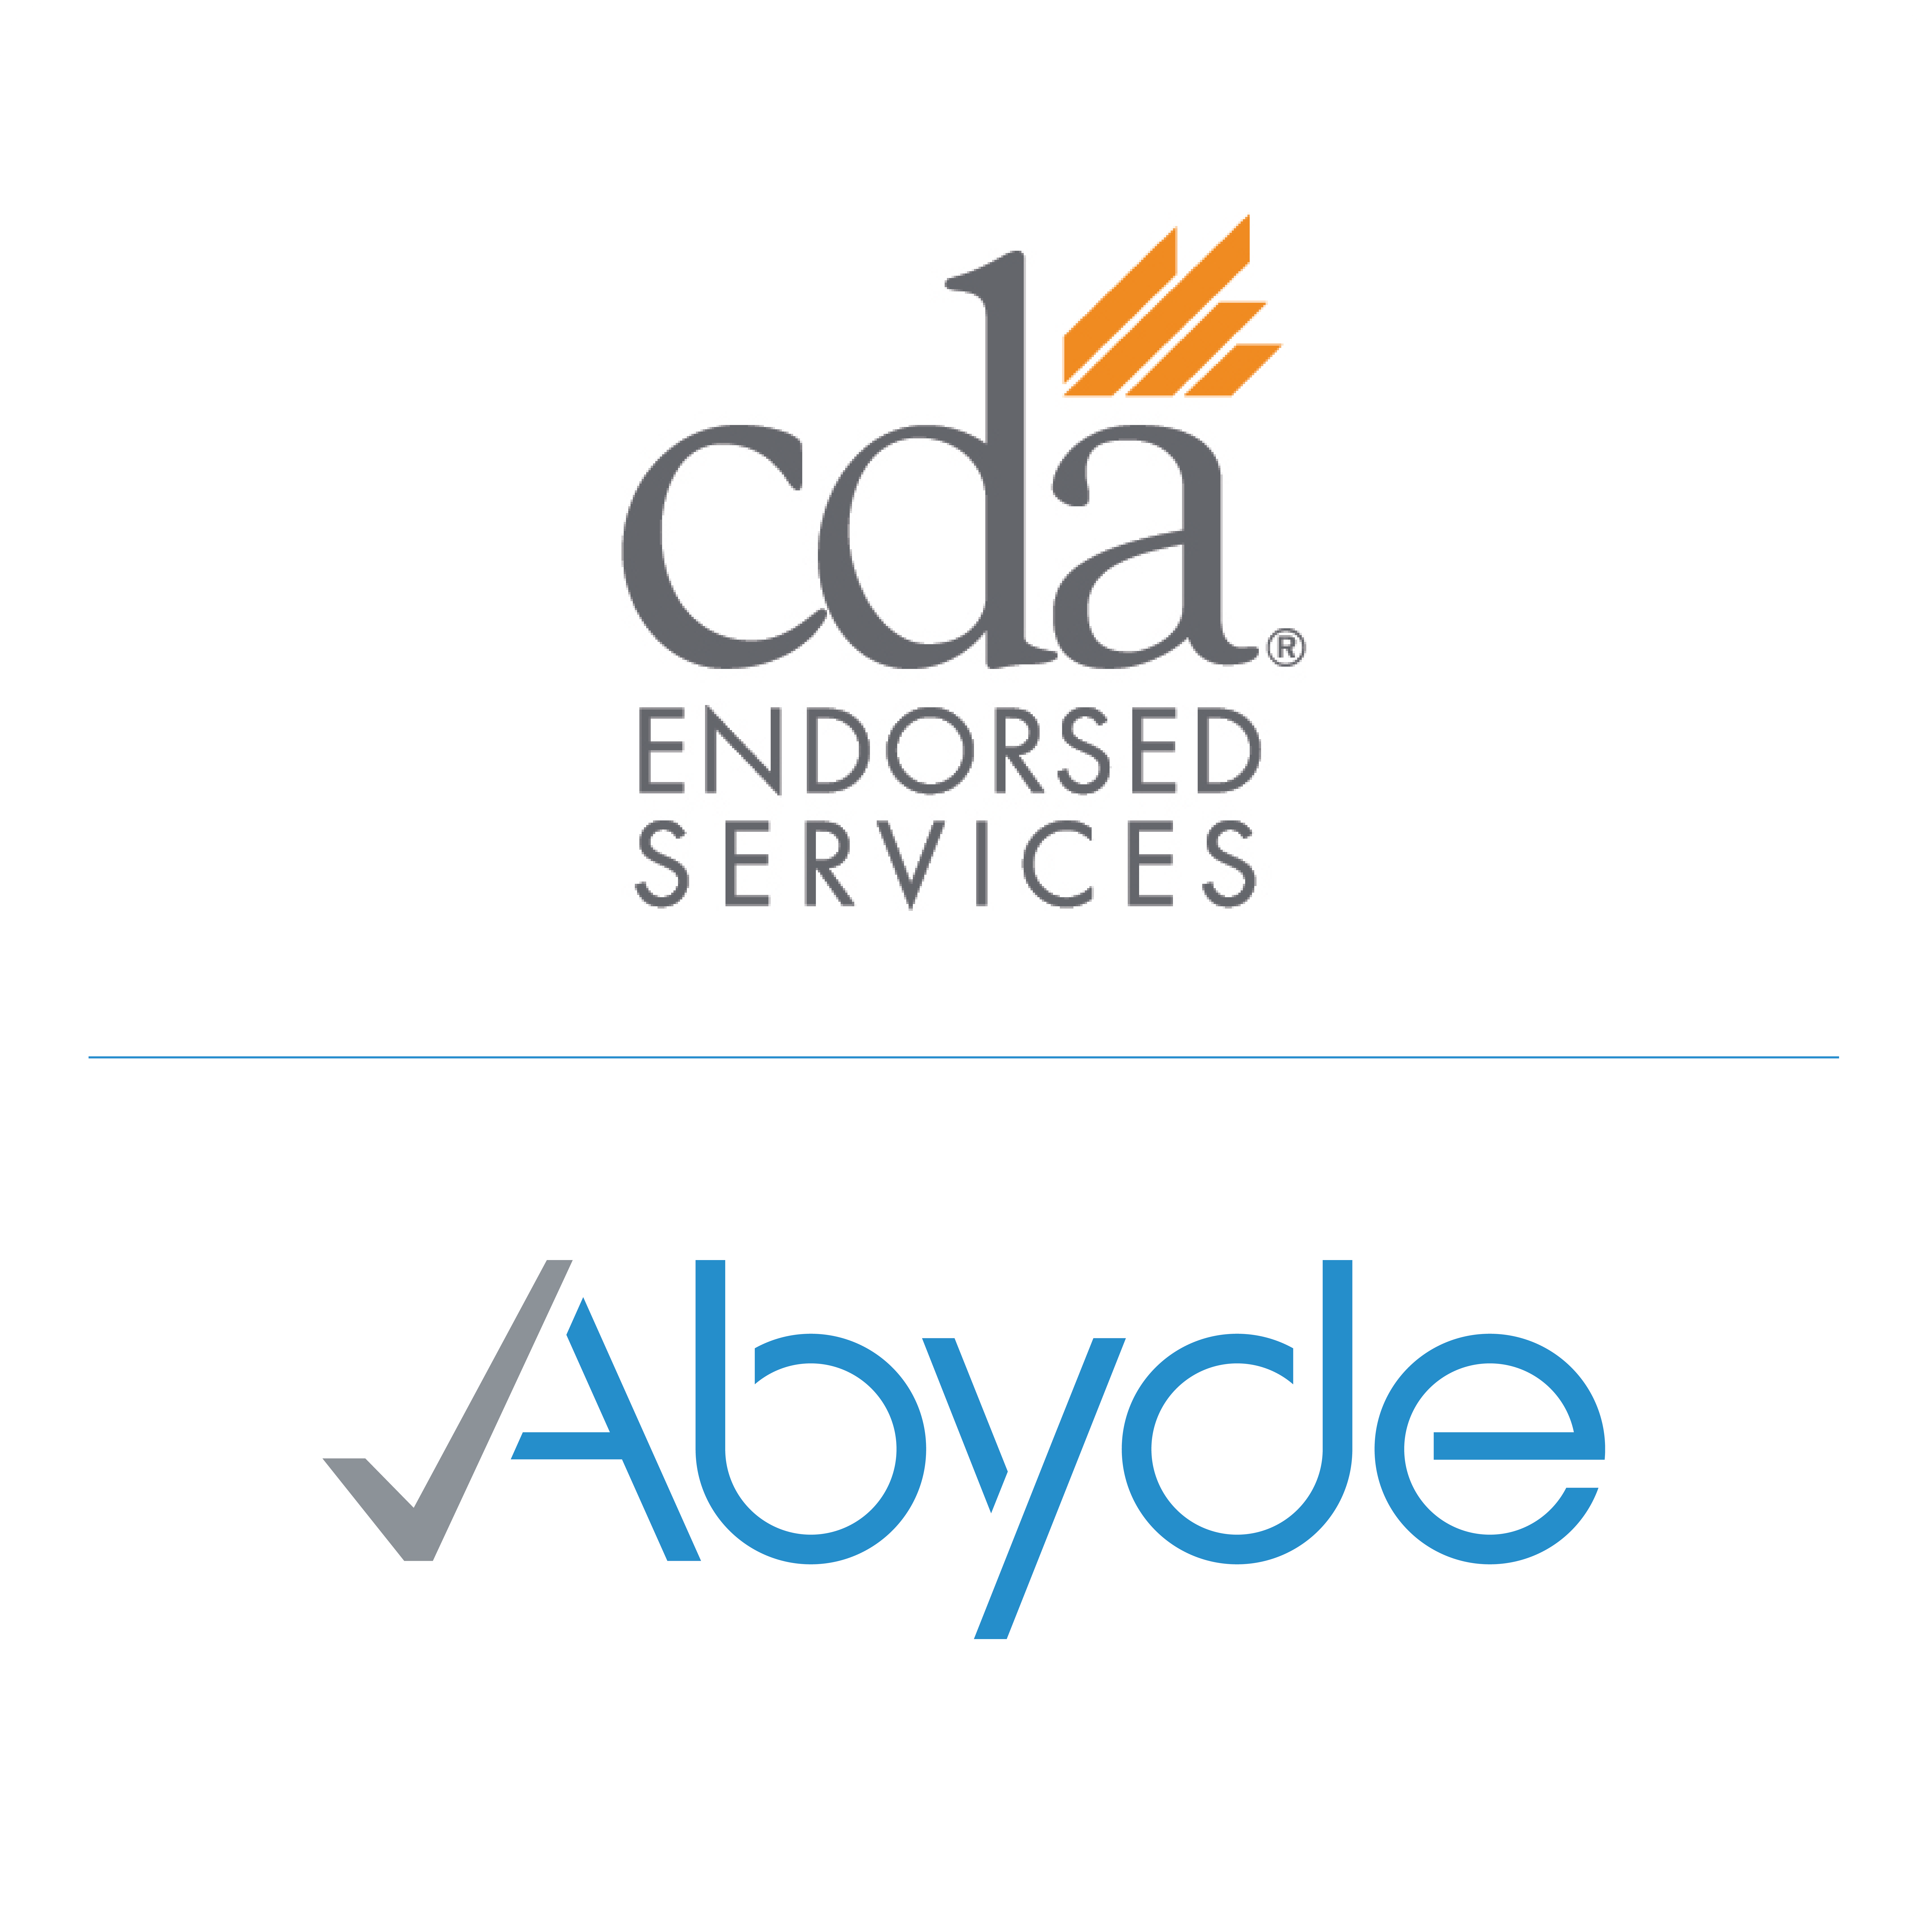 California Dental Association and Abyde partner to deliver HIPAA compliance to dental care professionals